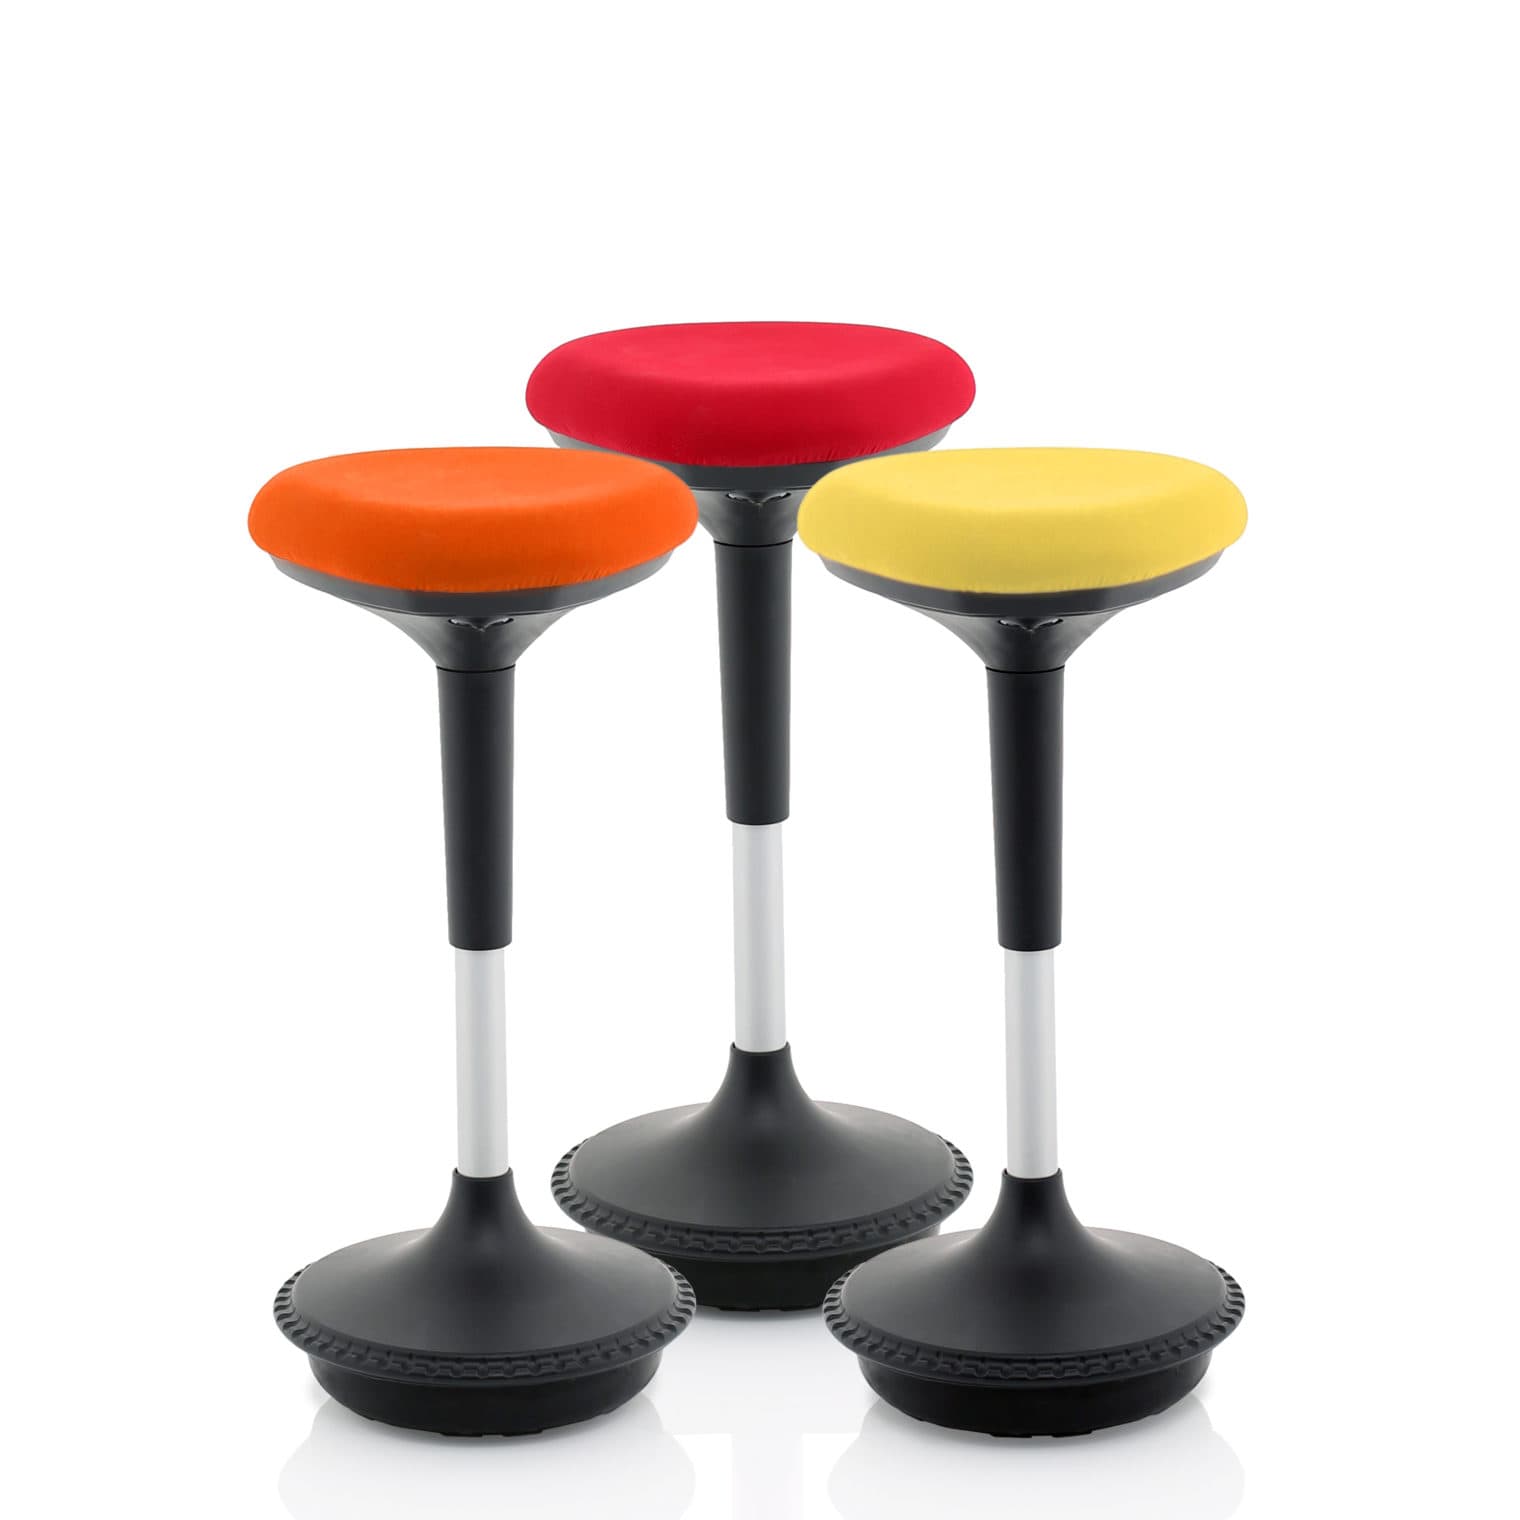 Sitall_Deluxe_Stools